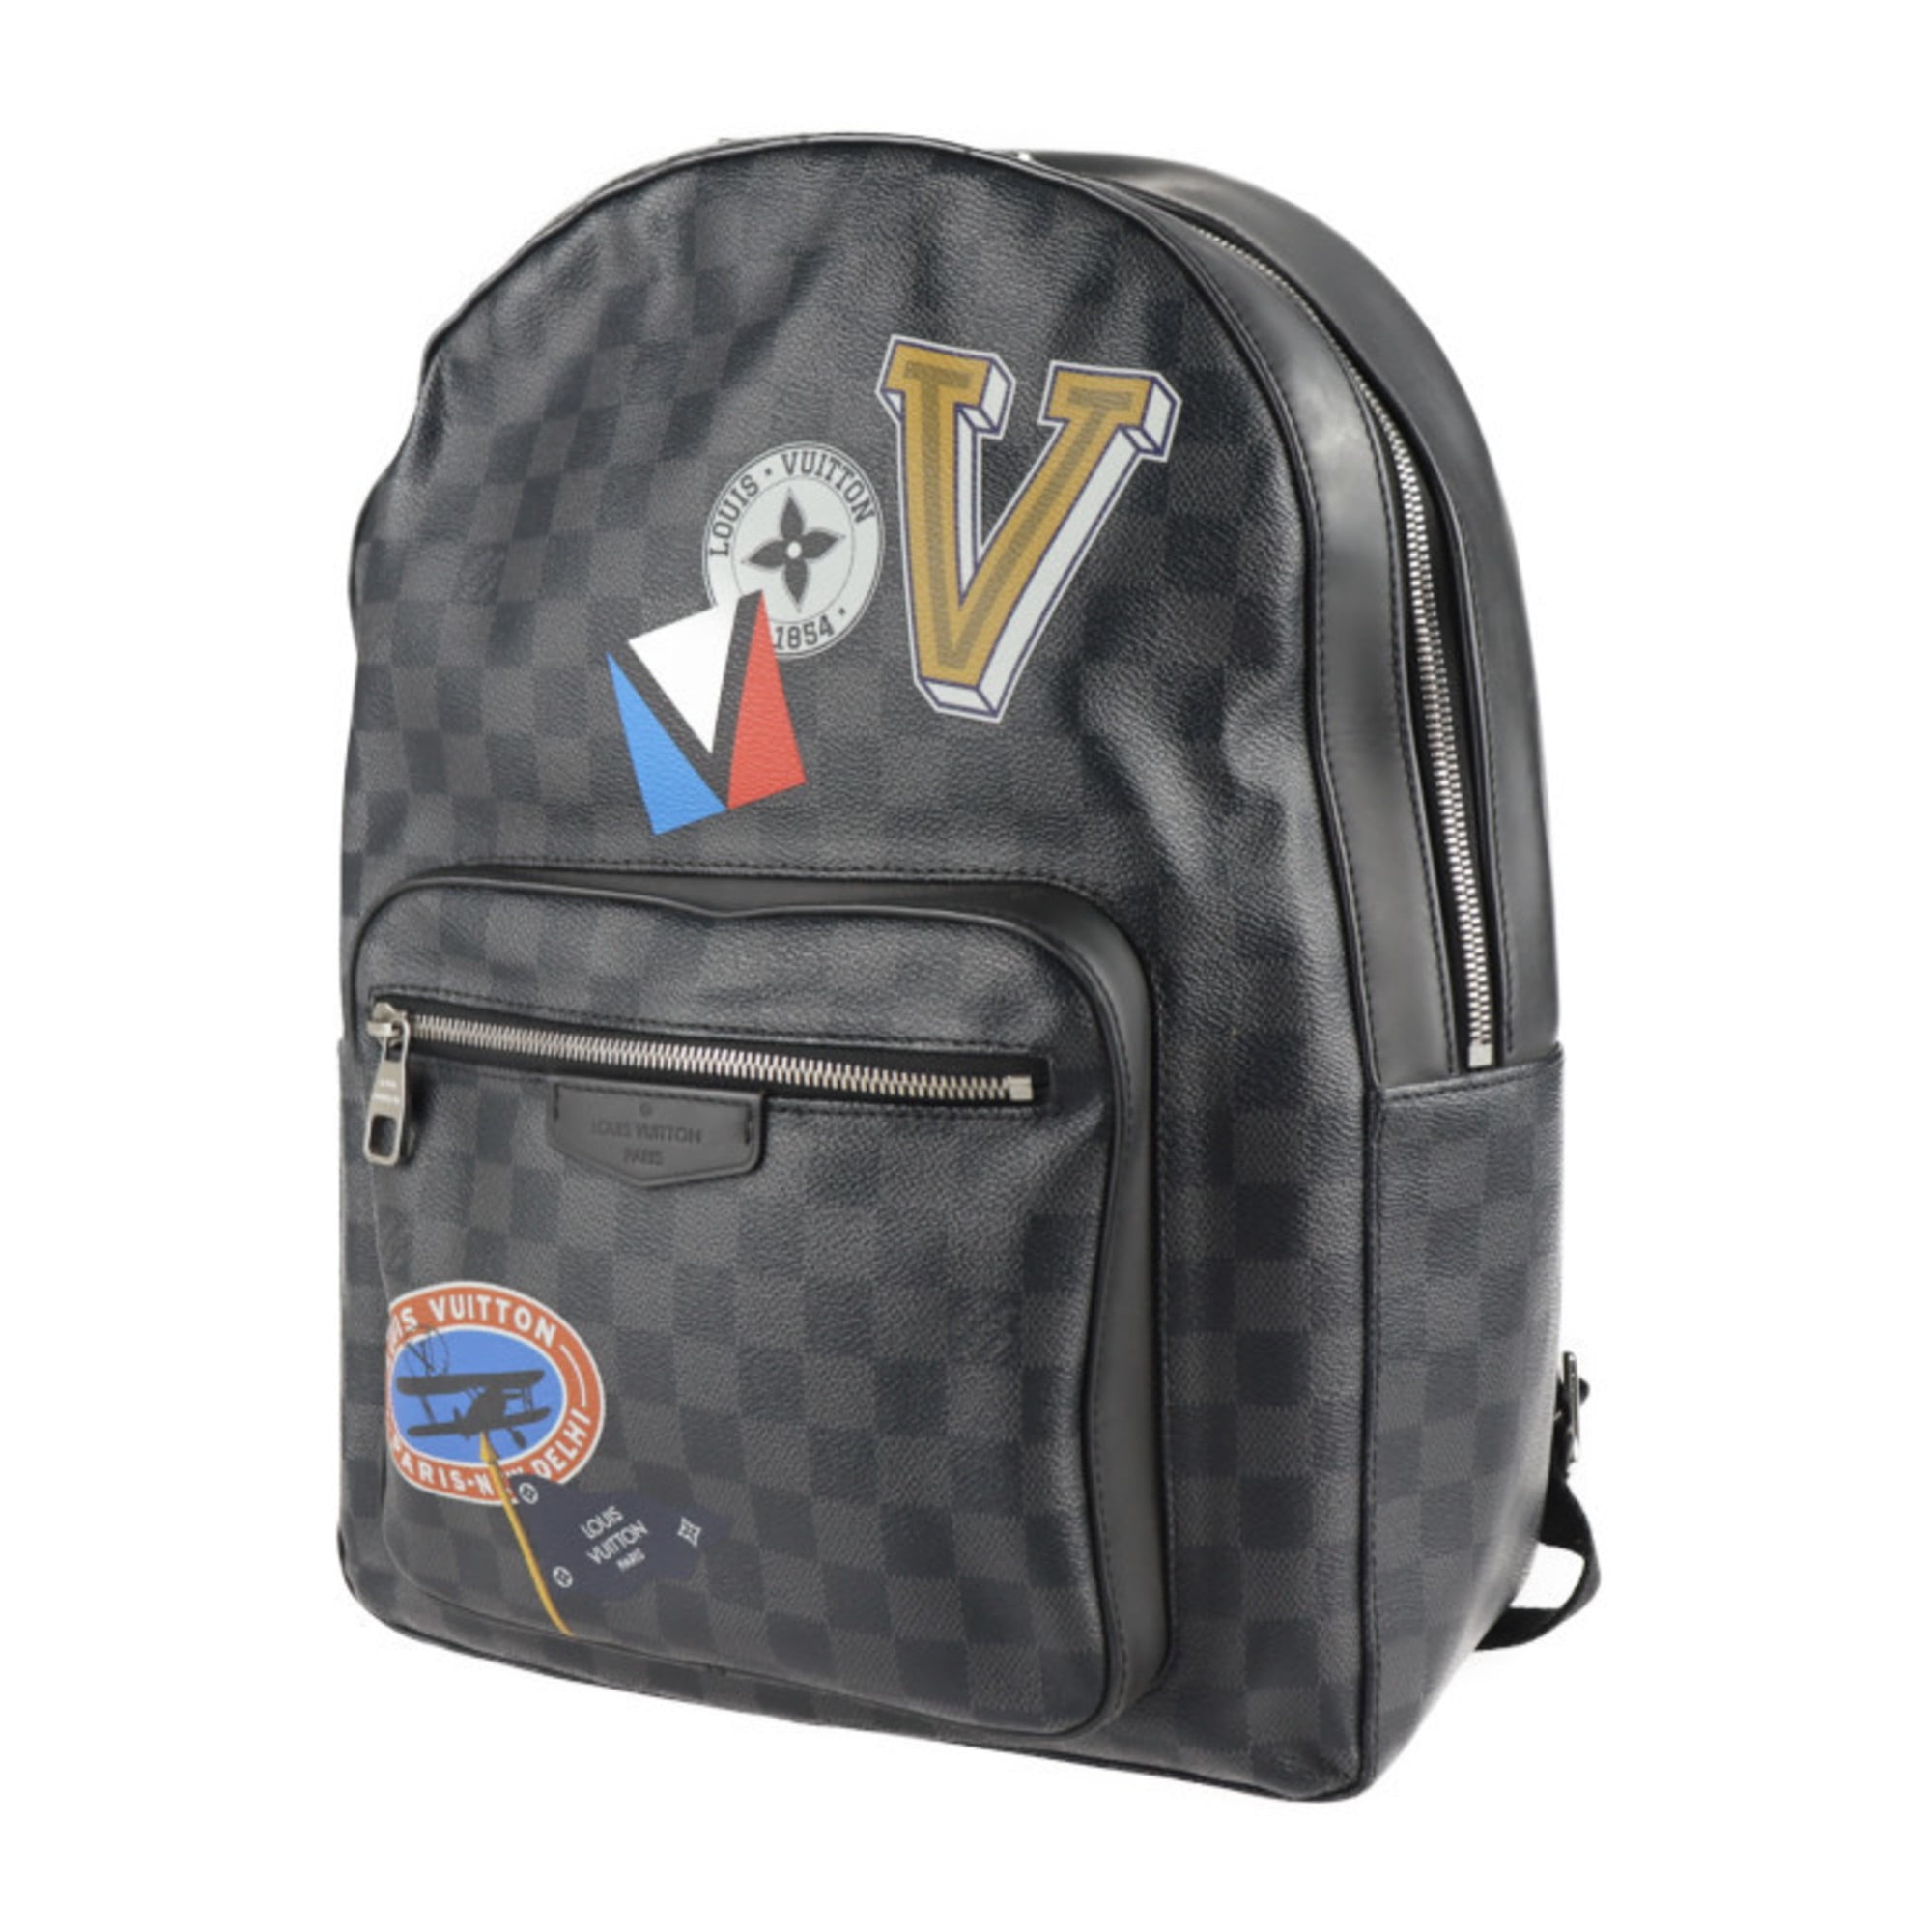 Authenticated Used LOUIS VUITTON Louis Vuitton Josh Backpack Daypack N64424  Damier Graphite Canvas Leather Gray Black 